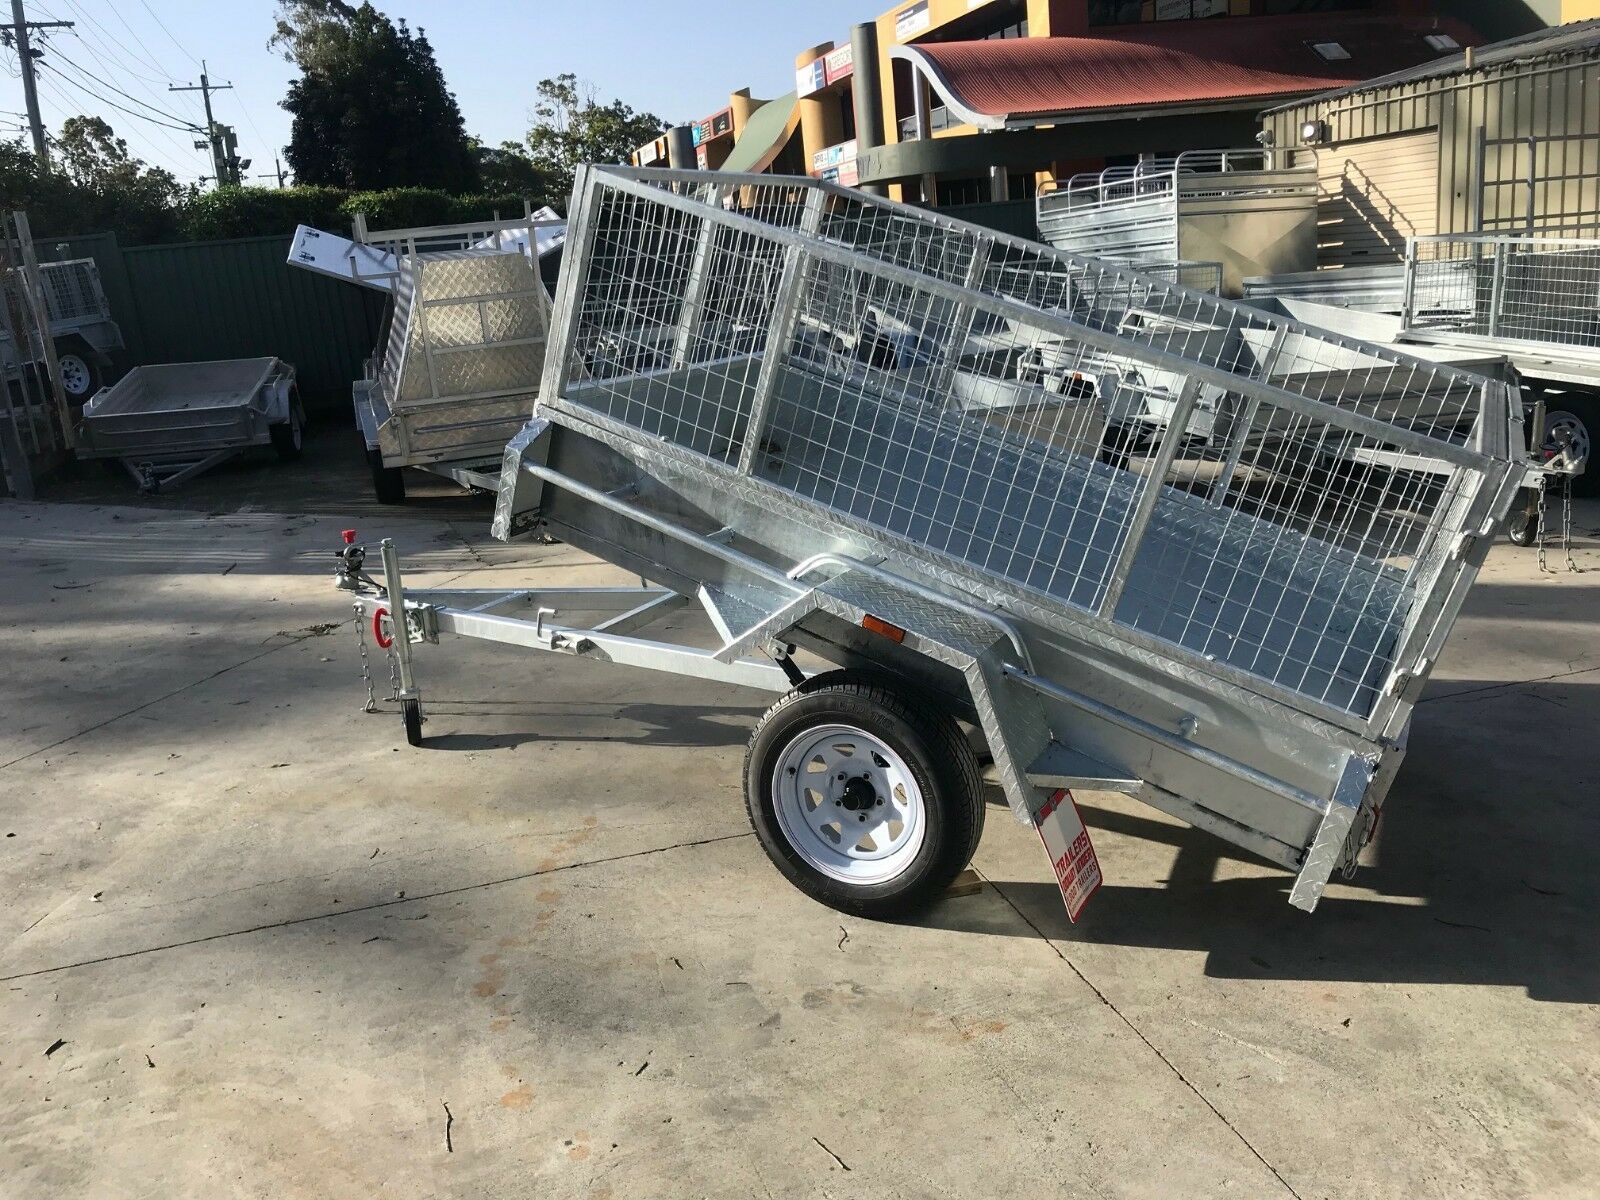 7×4 Heavy Duty Single Axle Galvanised Box Trailer with 3 Ft Cage for Sale in Brisbane